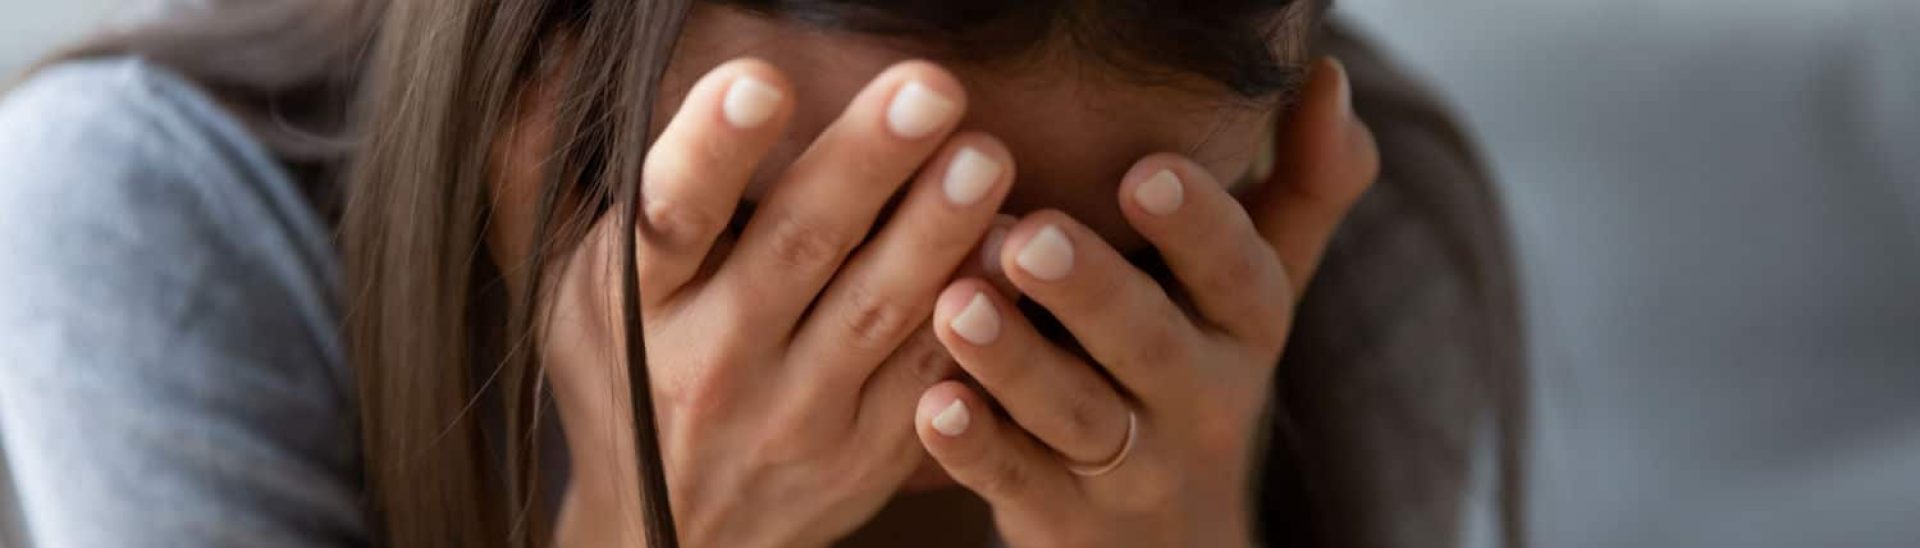 A woman crying due to filing a wrongful death claim